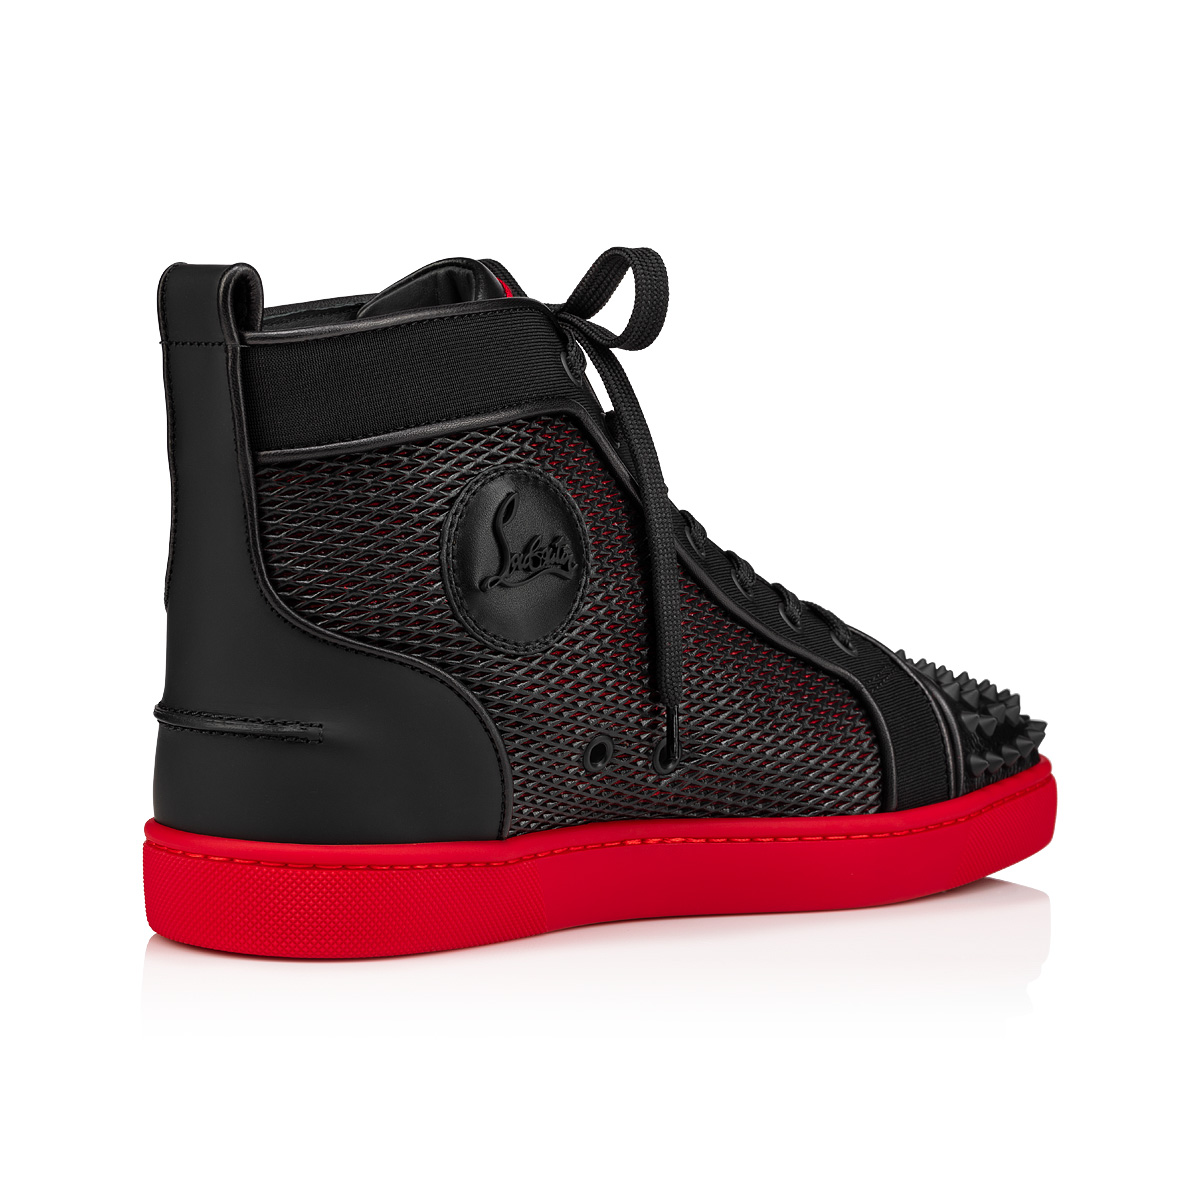 Lou Spikes - High-top sneakers - Graines calf leather, Funky mesh 